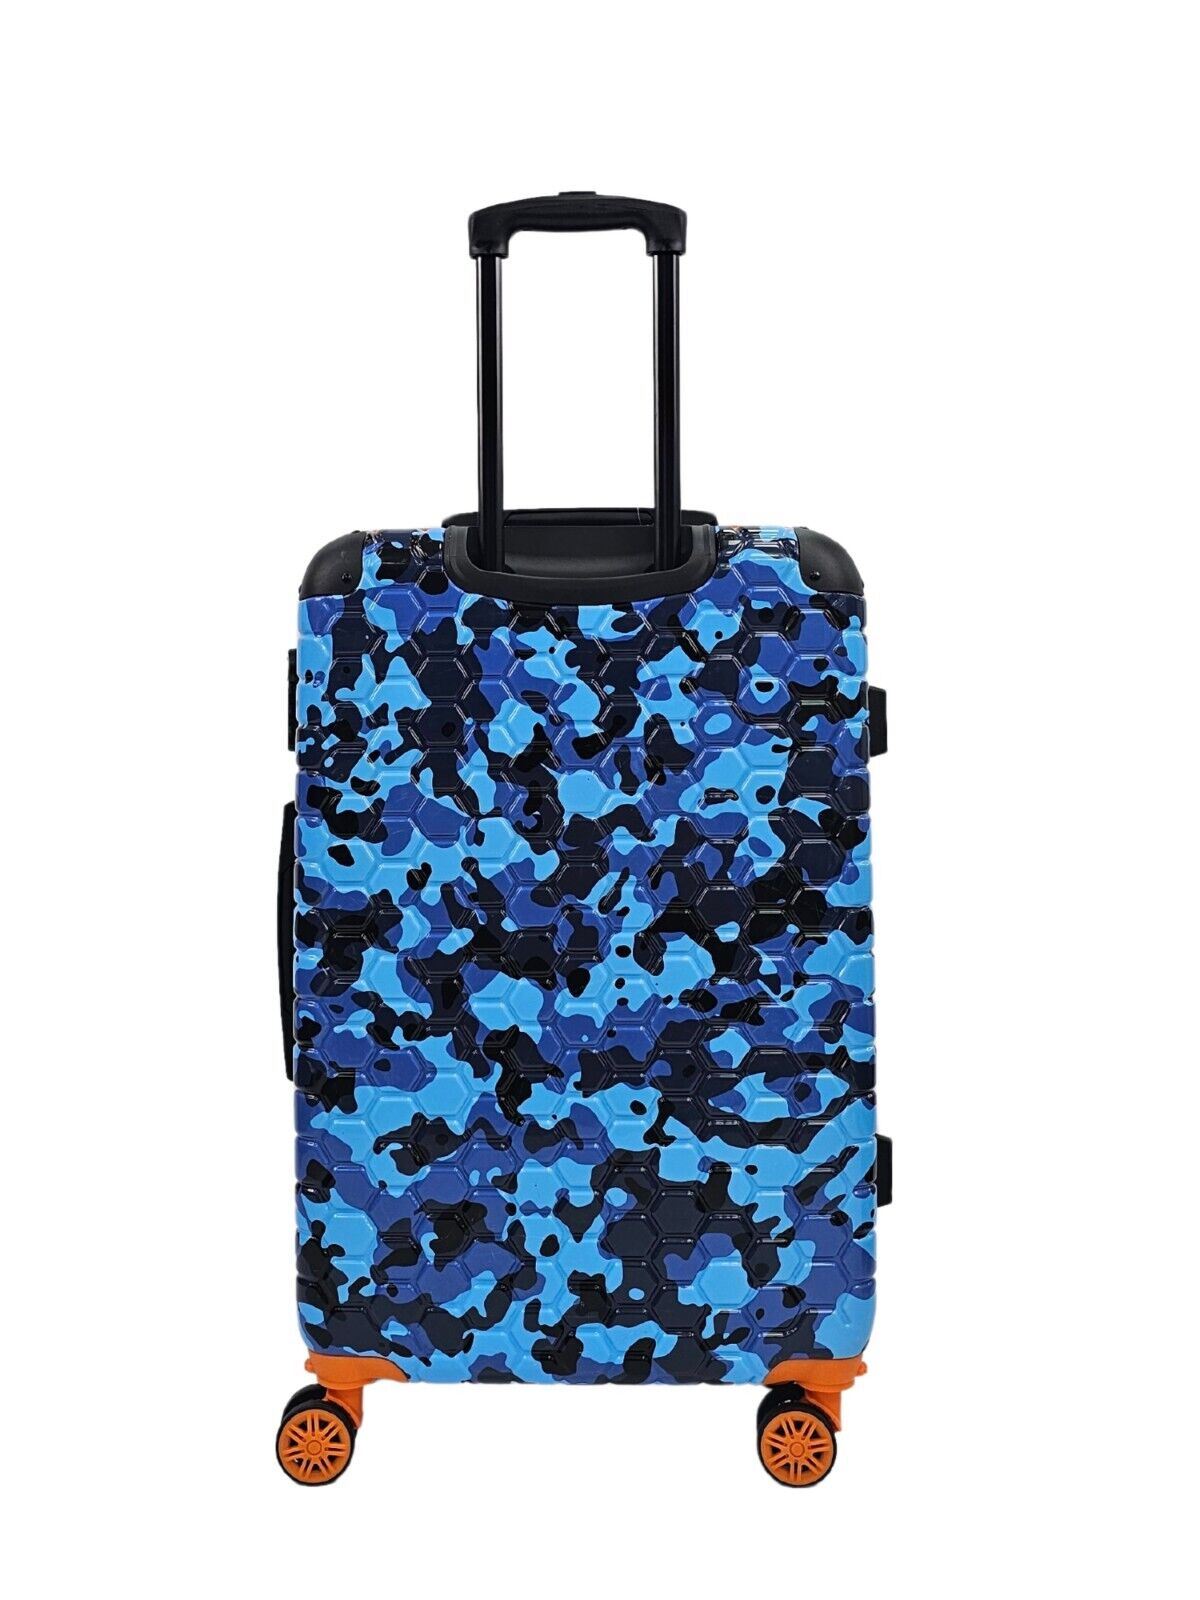 Hardshell Cabin Blue Suitcase Set Robust 8 Wheel ABS Luggage Travel Bag - Upperclass Fashions 